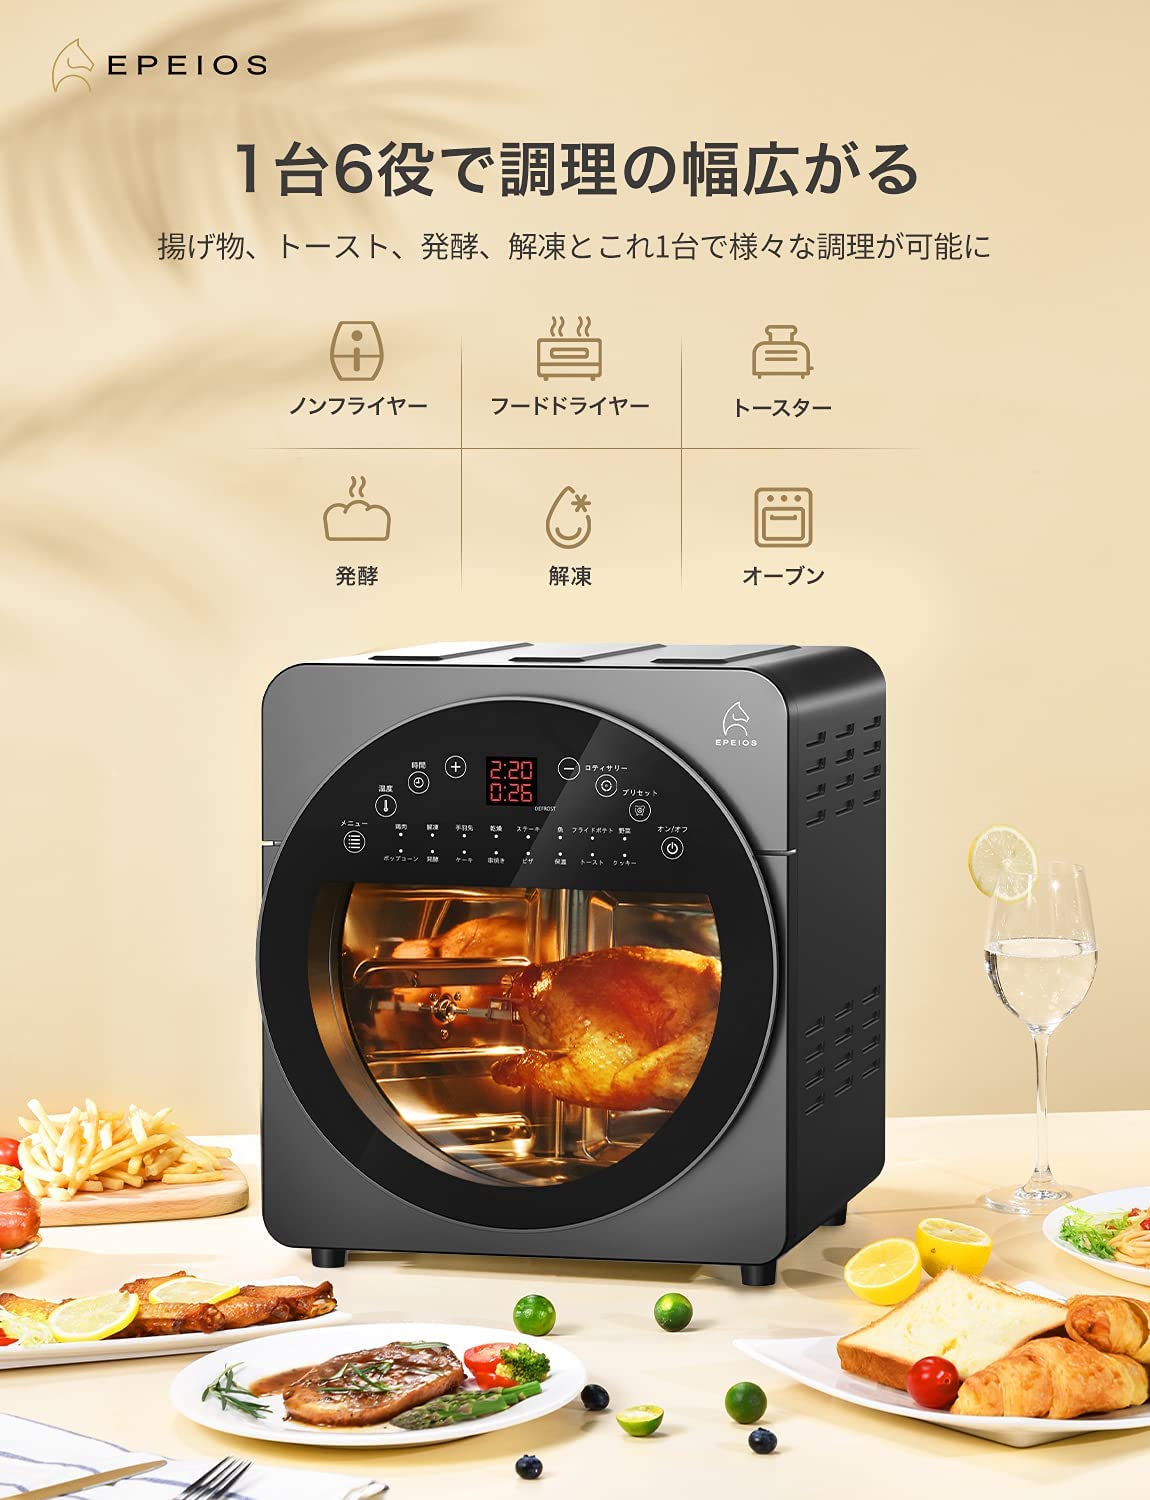 Epeios Air Oven 14L Big Size Air Circulation Technology Oil-Free 